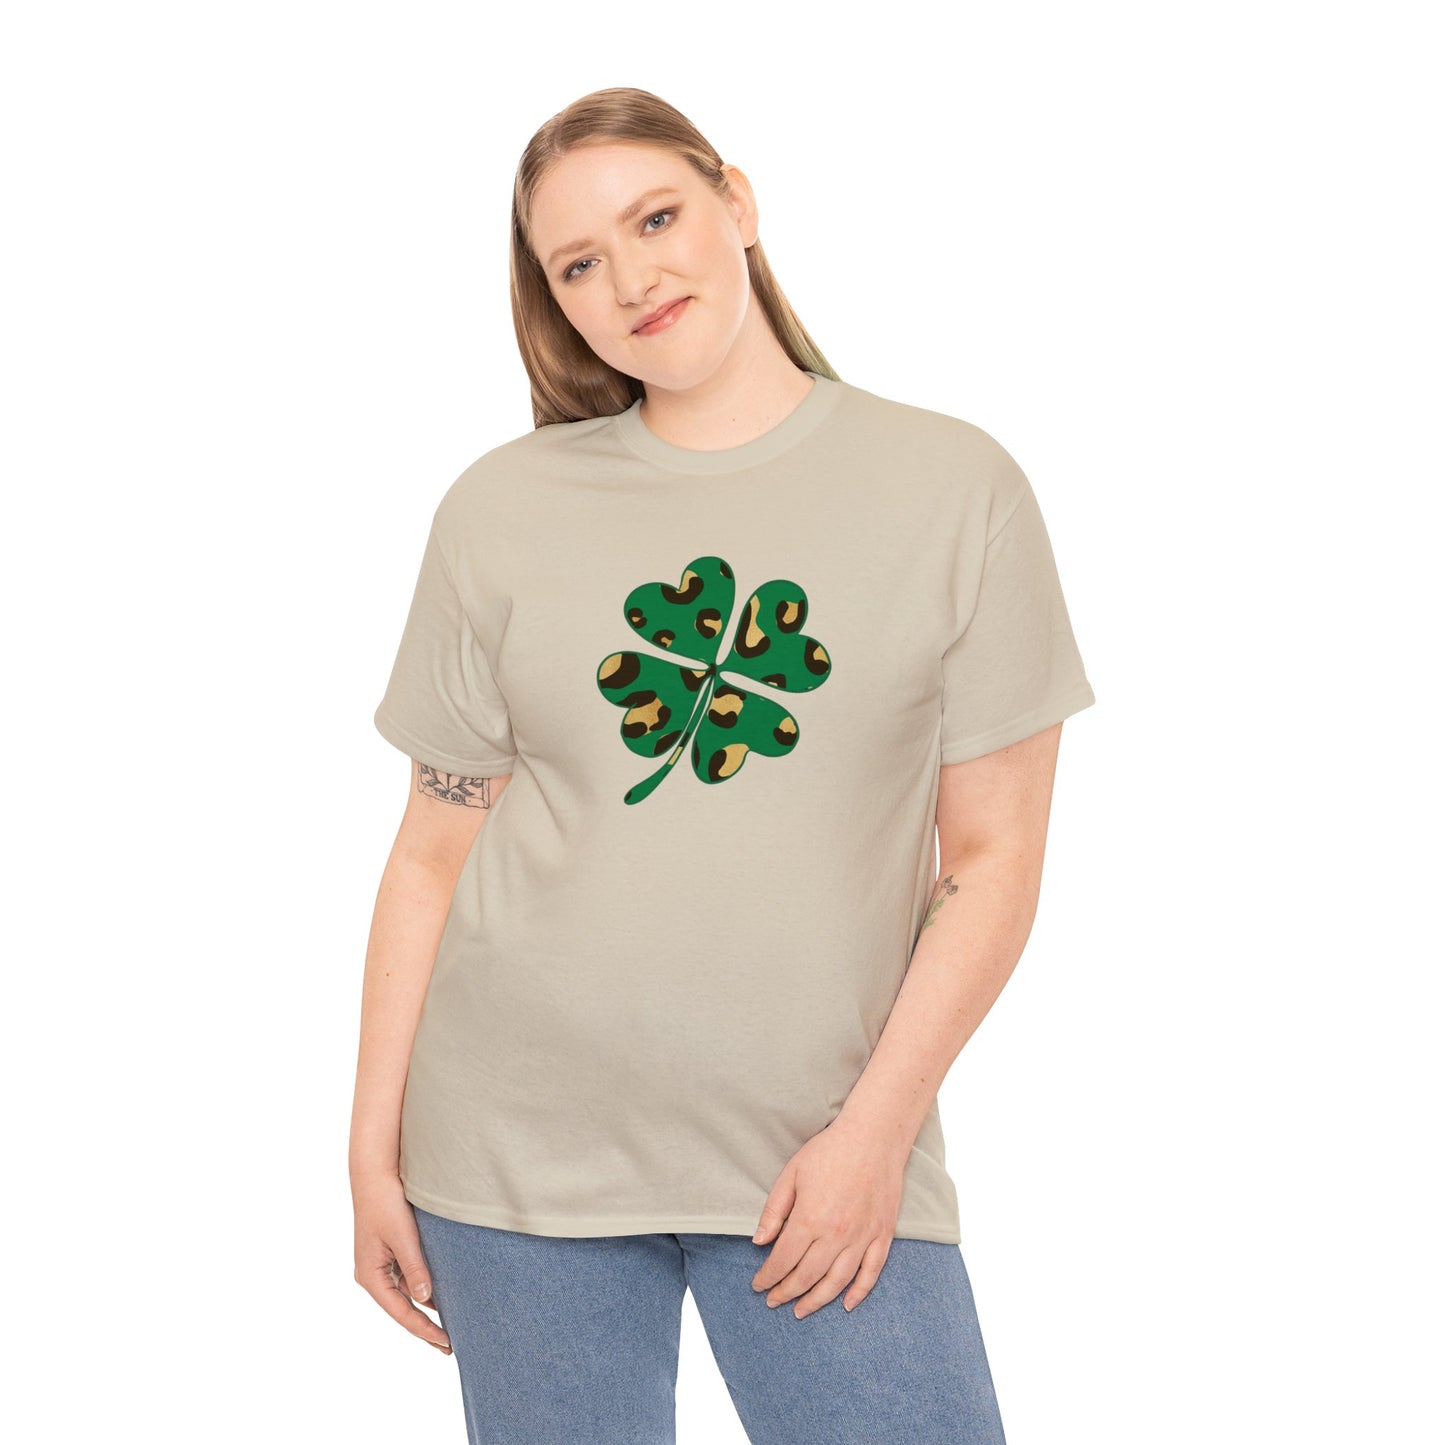 Clover me in luck